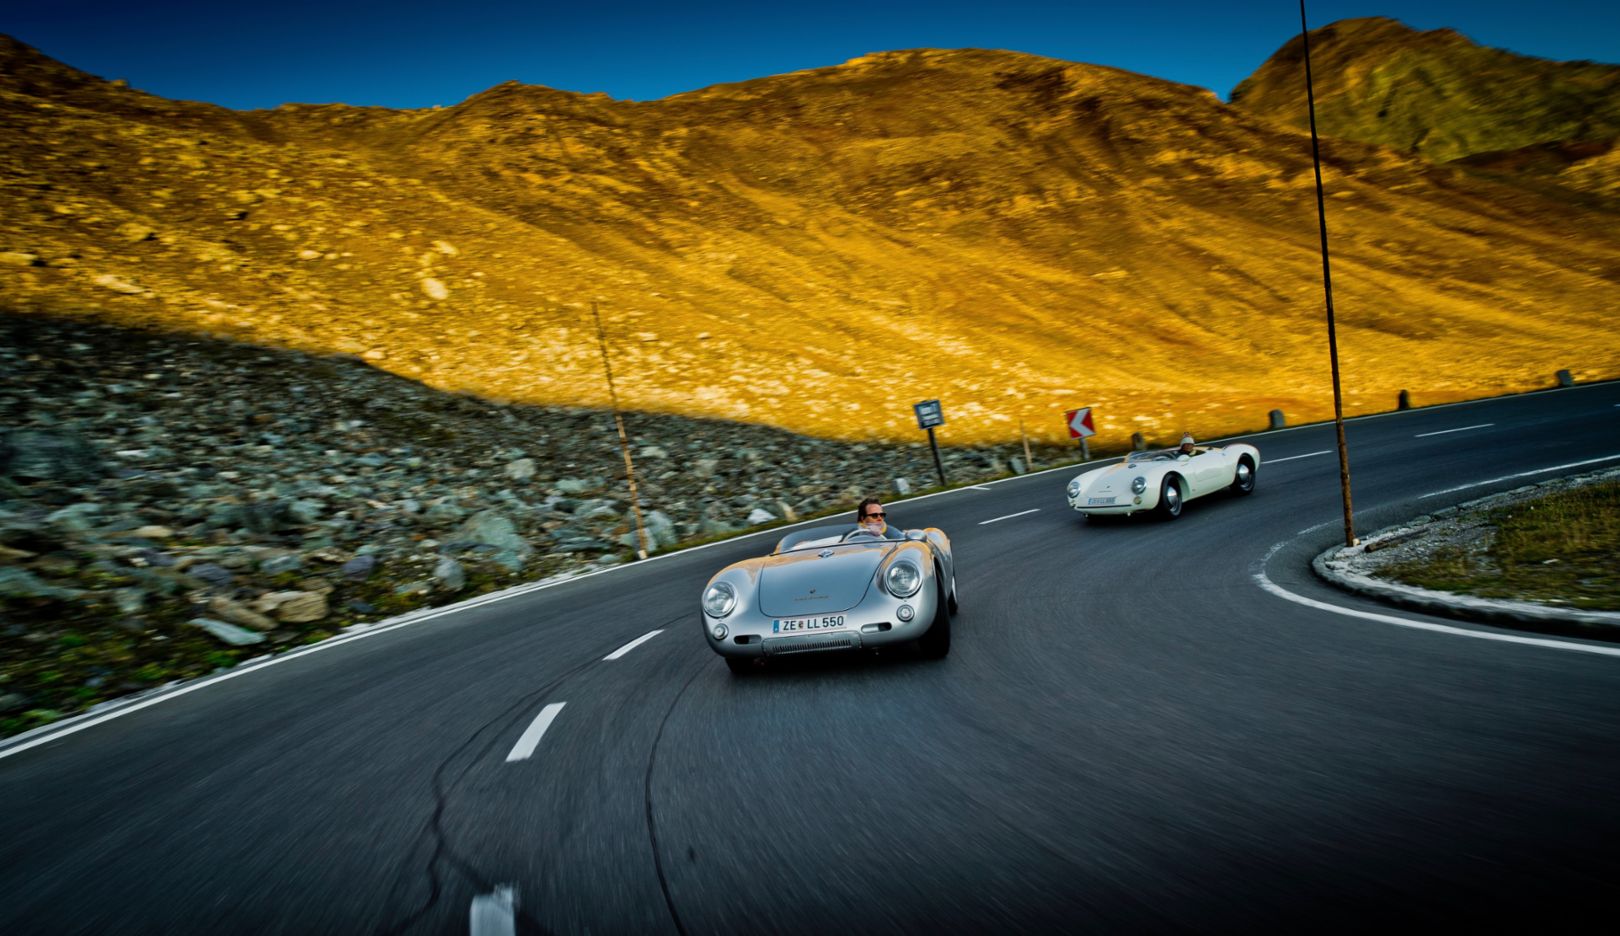 The bleak mountain world, cut through by the asphalt of the High Alpine Road, whose hairpin bends and height make equal demands on chassis and engine.